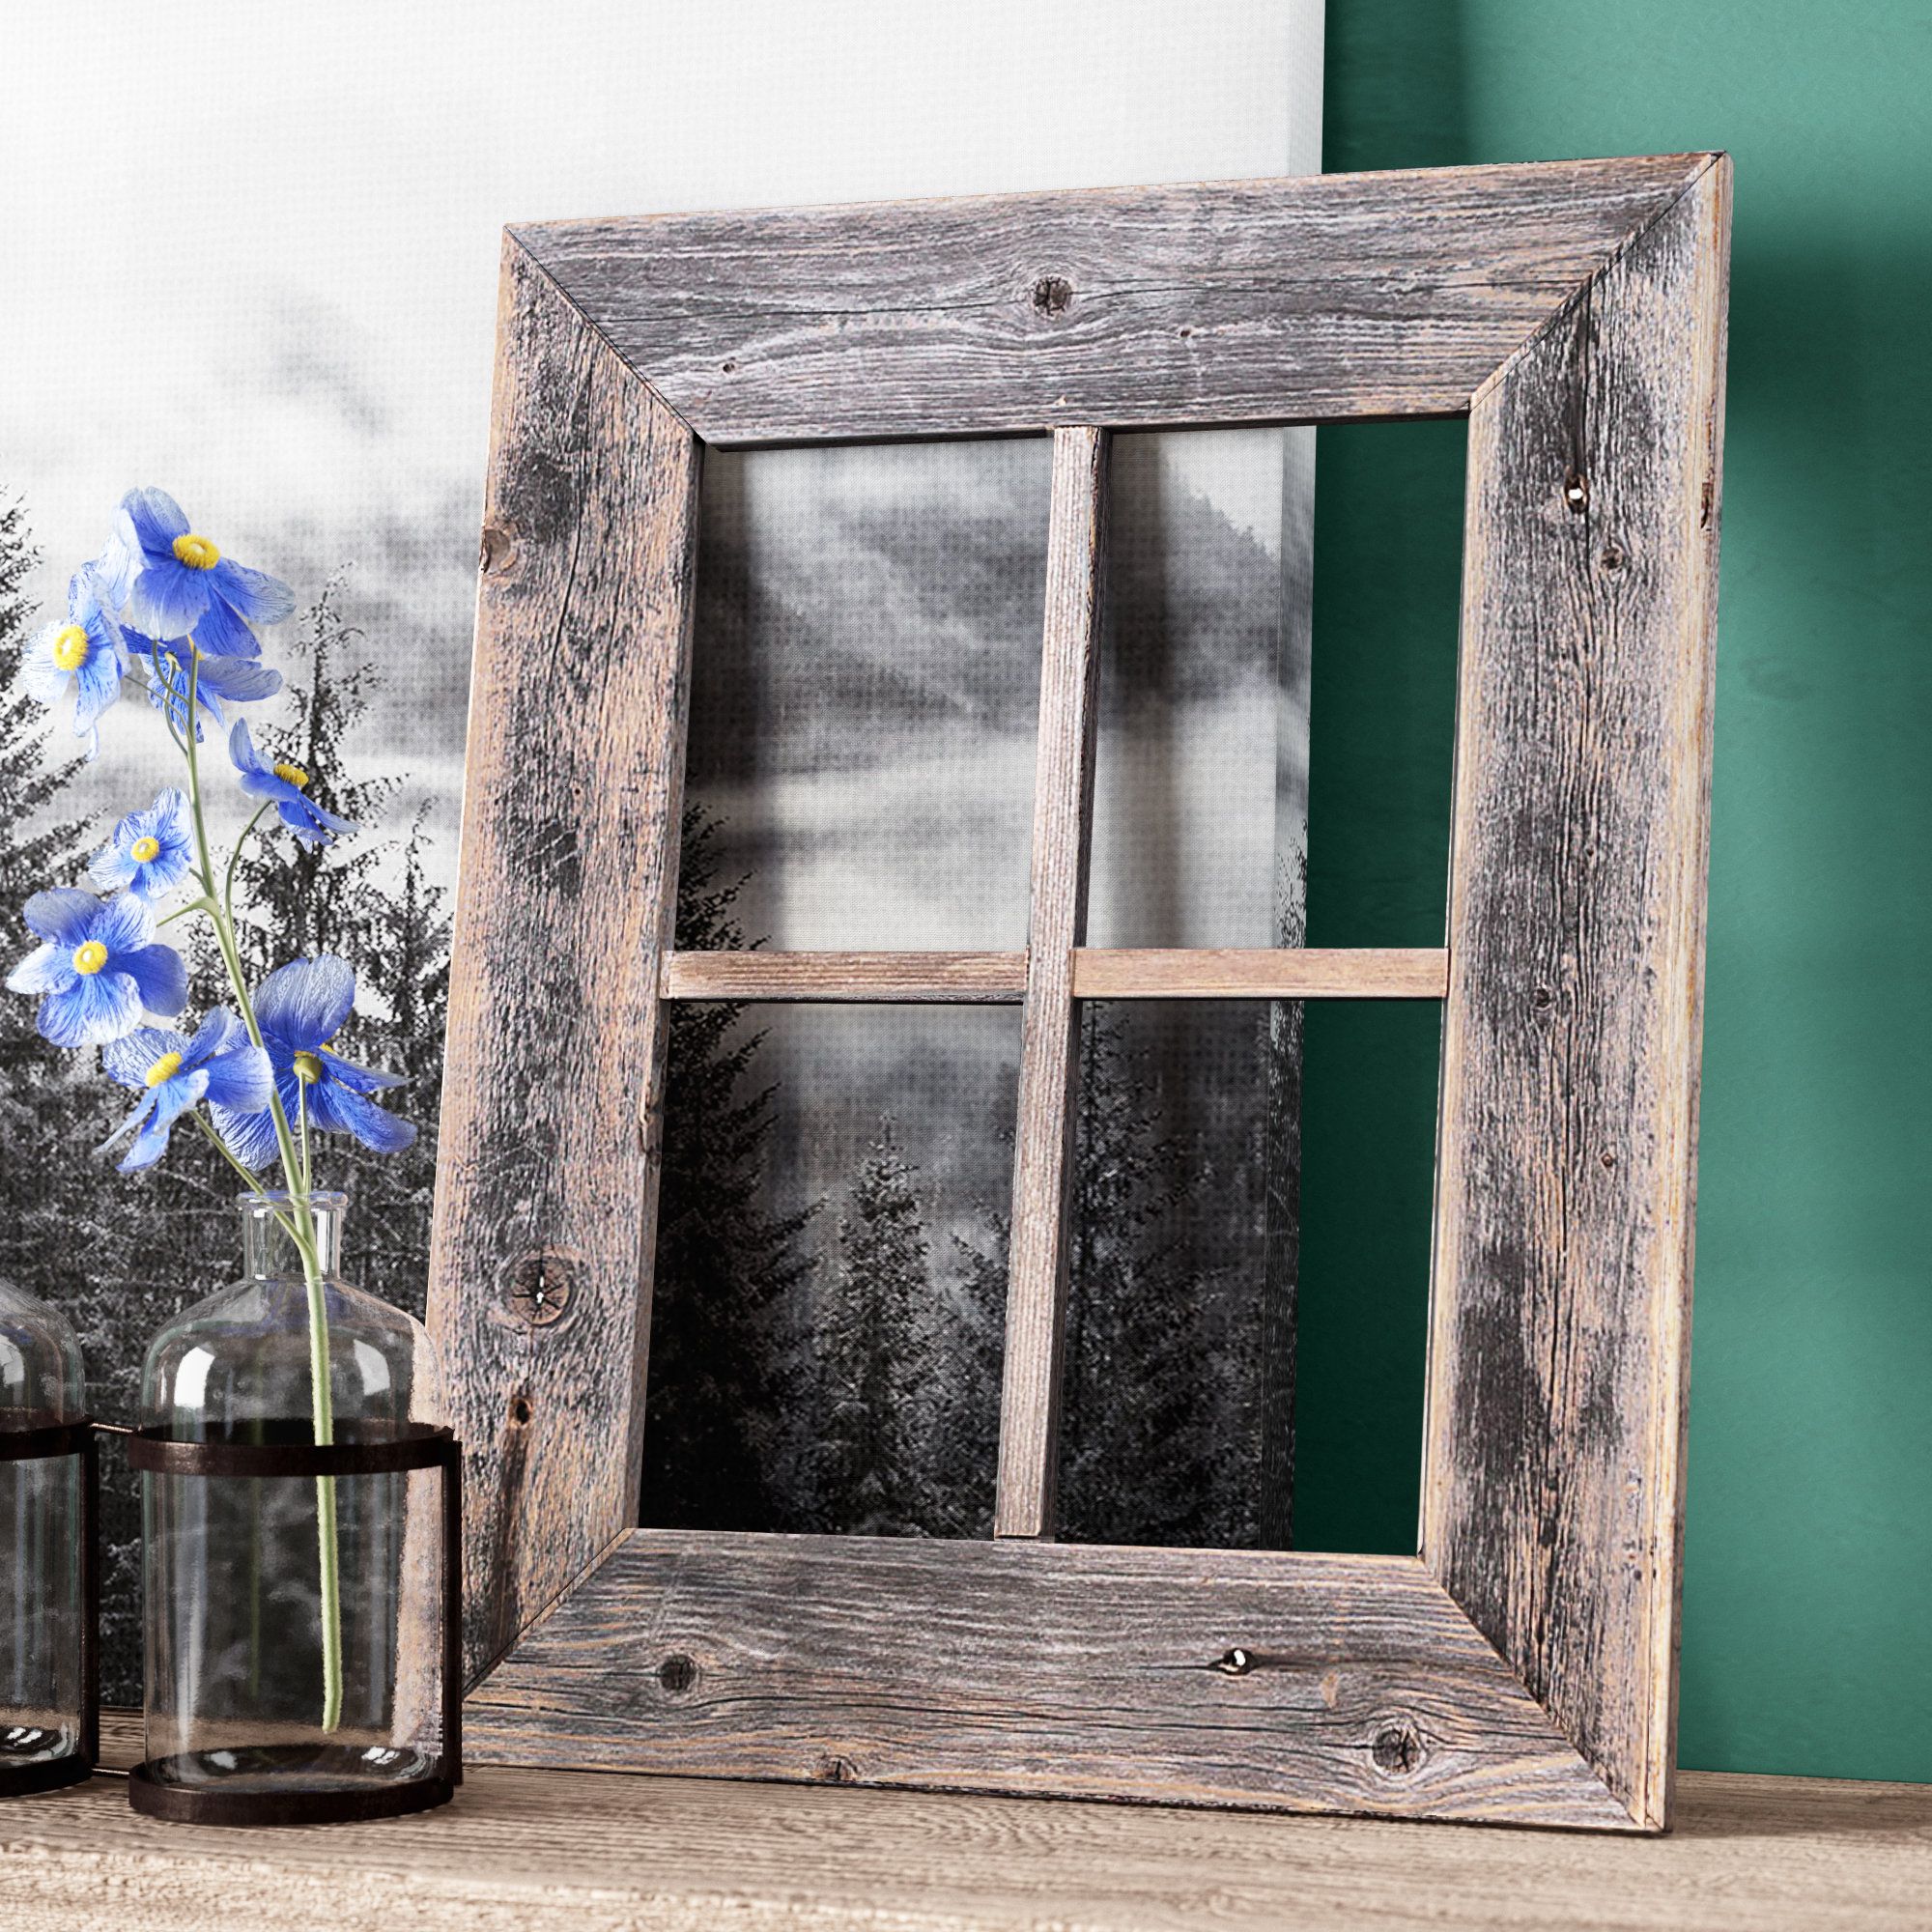 Featured Photo of Old Rustic Barn Window Frame